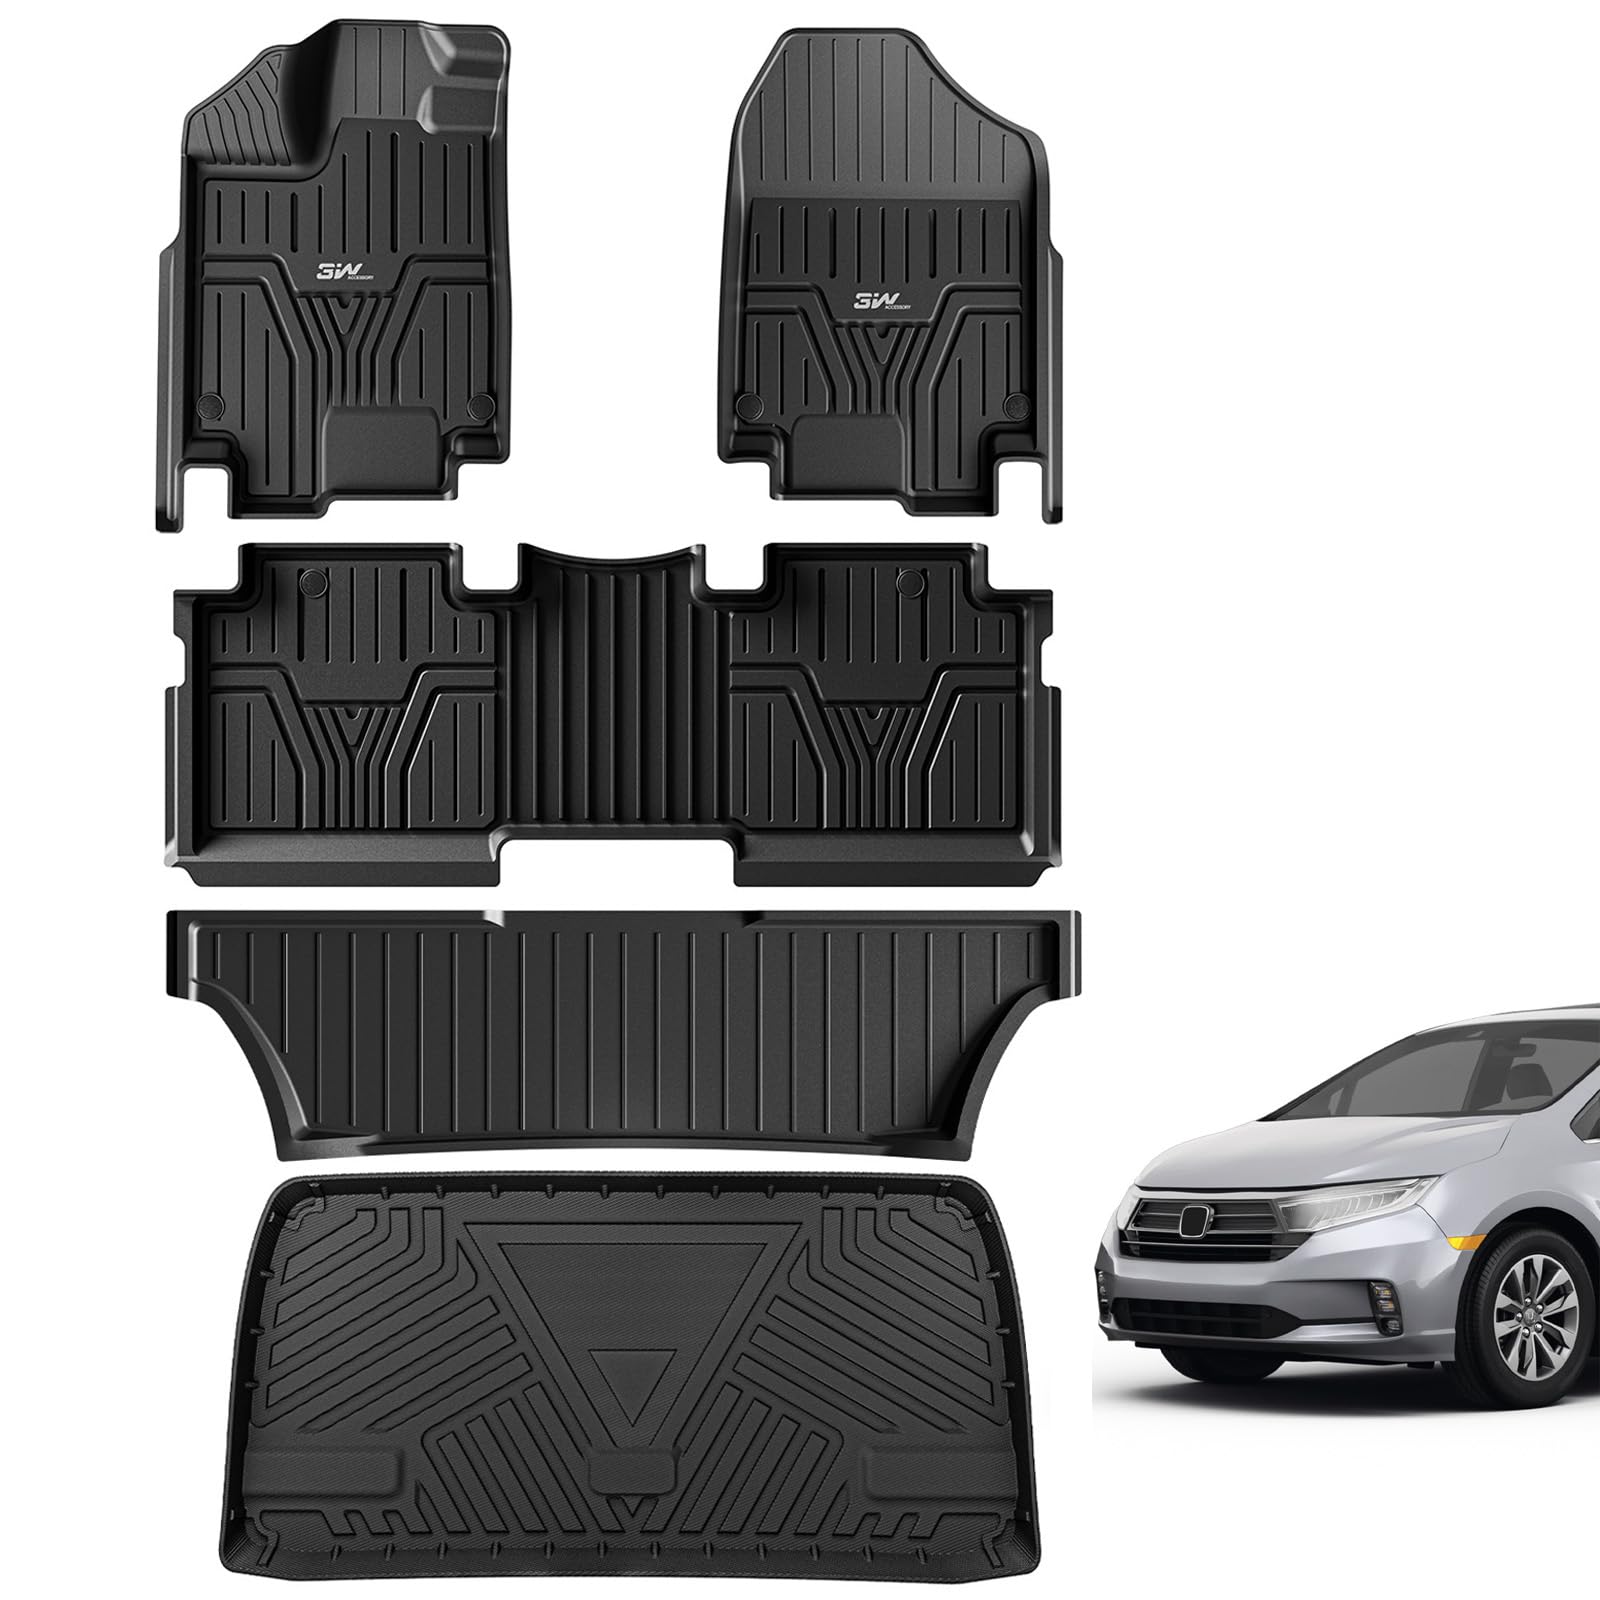 3W Honda Odyssey 2018-2024 Custom Floor Mats / Trunk Mat TPE Material & All-Weather Protection, 2018-2024 / Odyssey 2018-2024 / 1st&2nd&3rd Row+Trunk